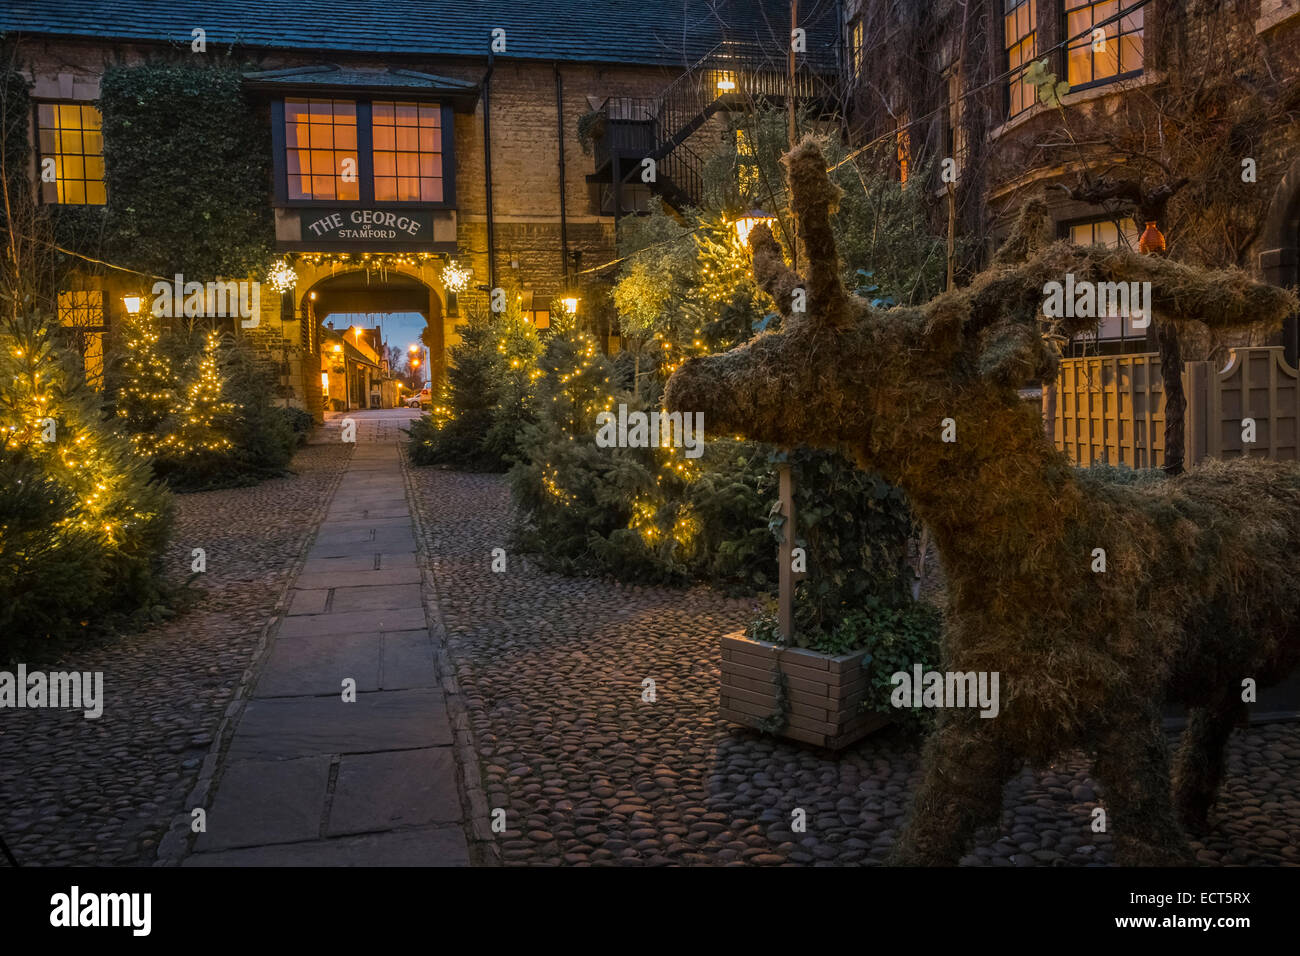 Christmas decorations, The George Hotel and Restaurant, Stamford, Lincolnshire Stock Photo